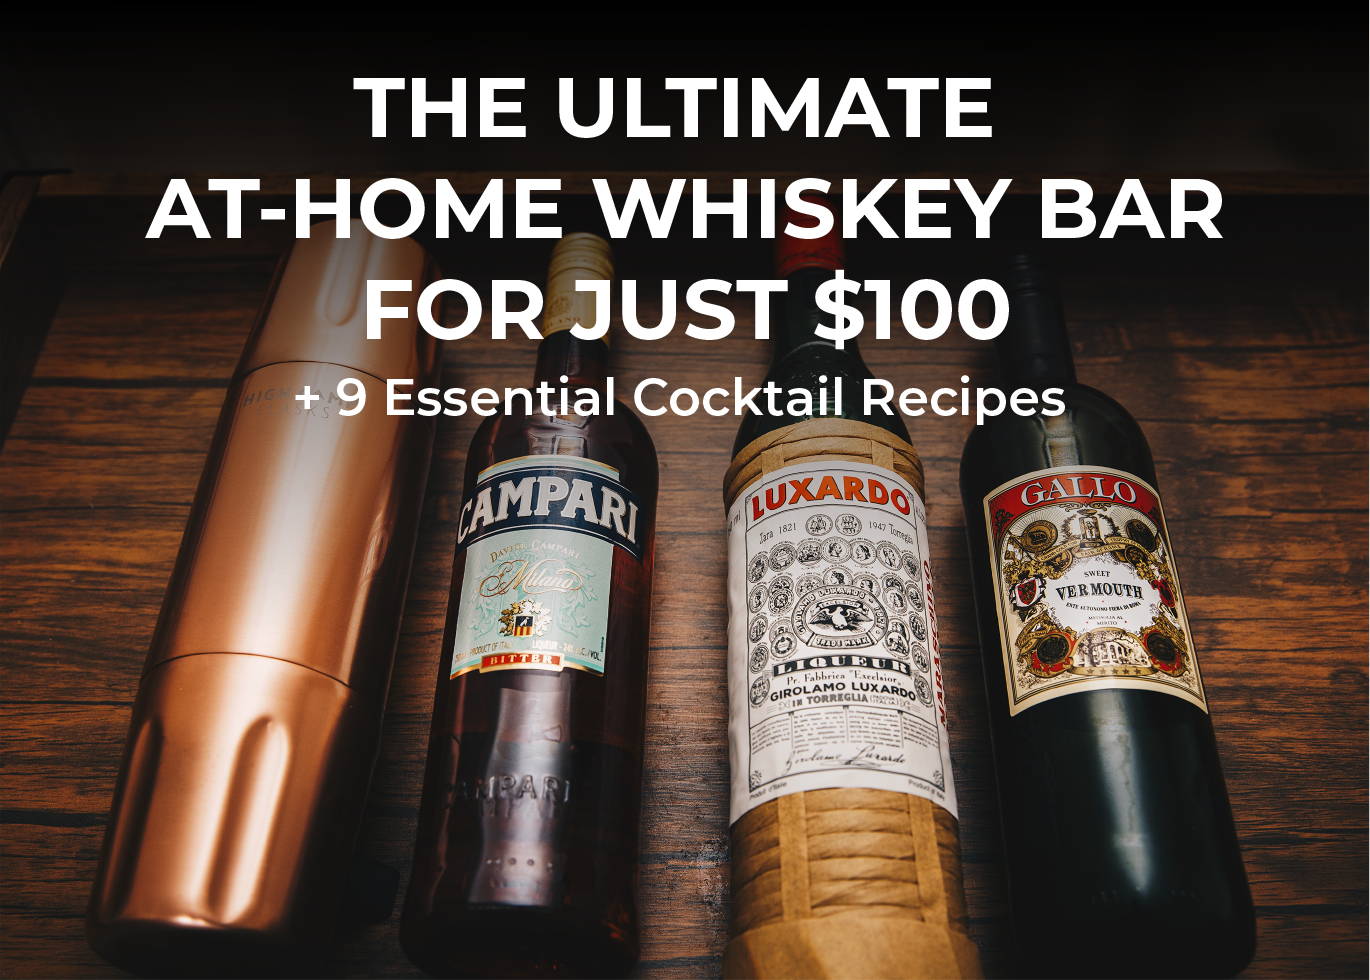 Build Your Own Whiskey Bar For 100 High Camp Flasks,Grape Leaves Recipe